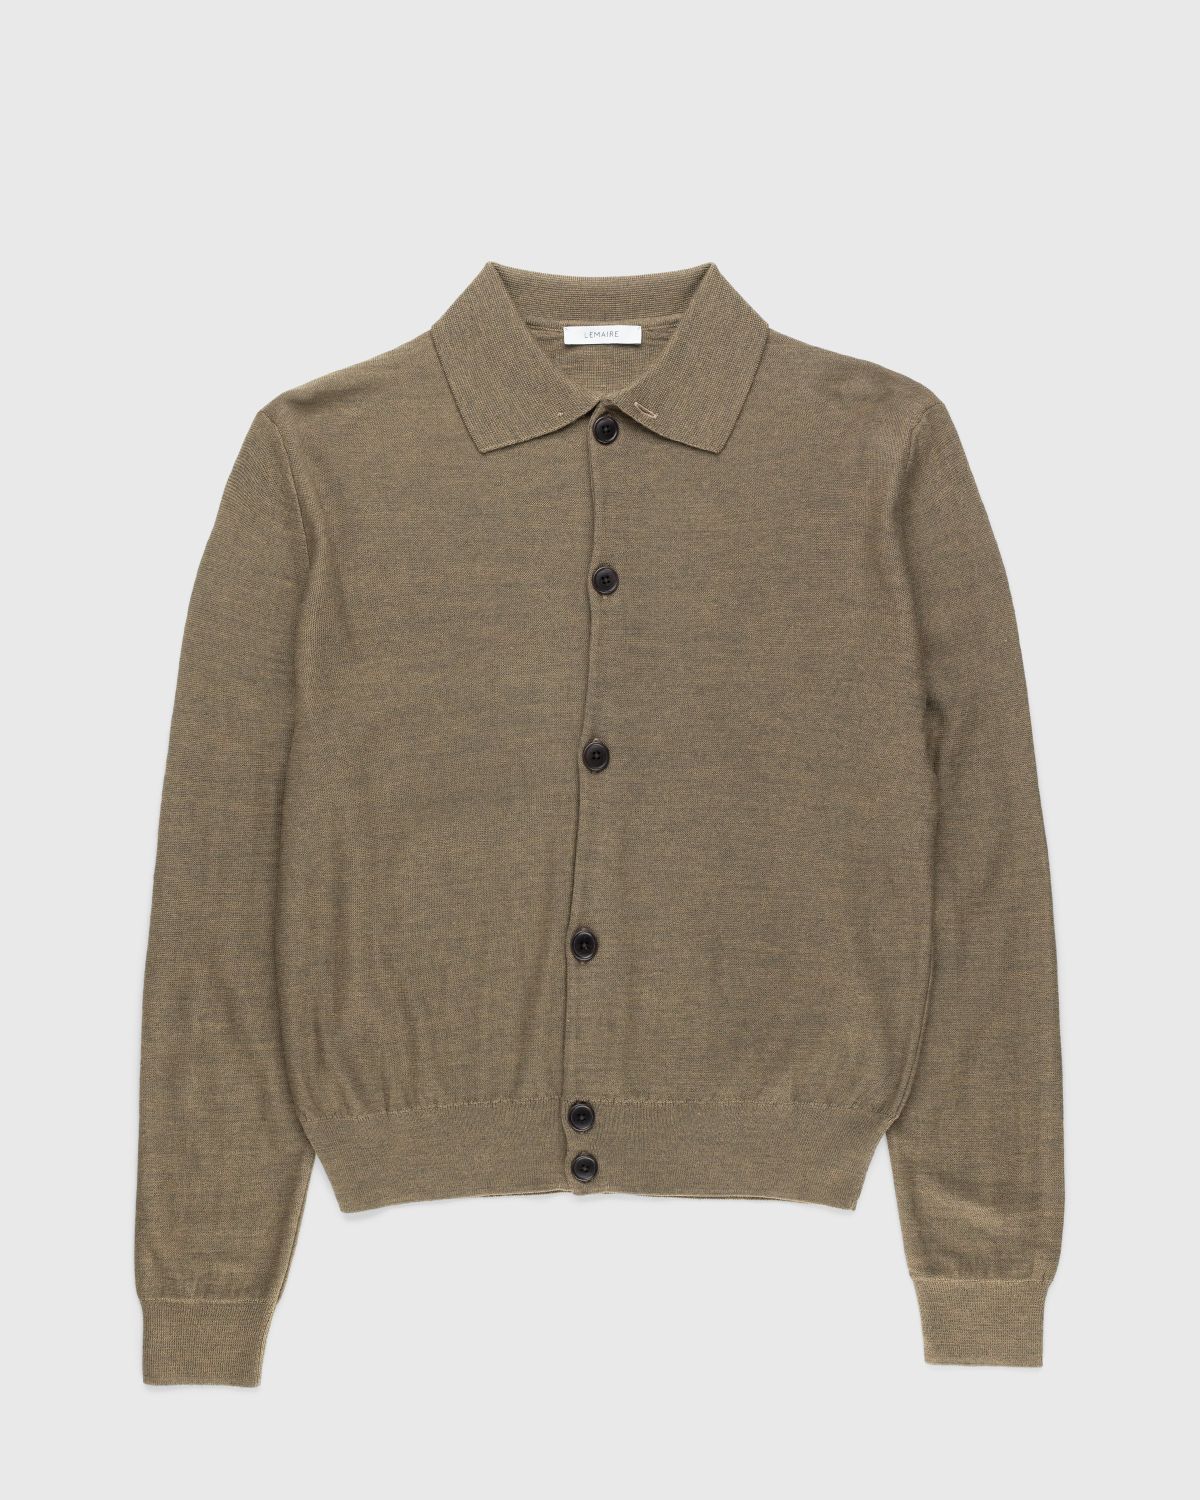 Lemaire – Convertible Collar Knit Shirt - Polos - Brown - Image 1